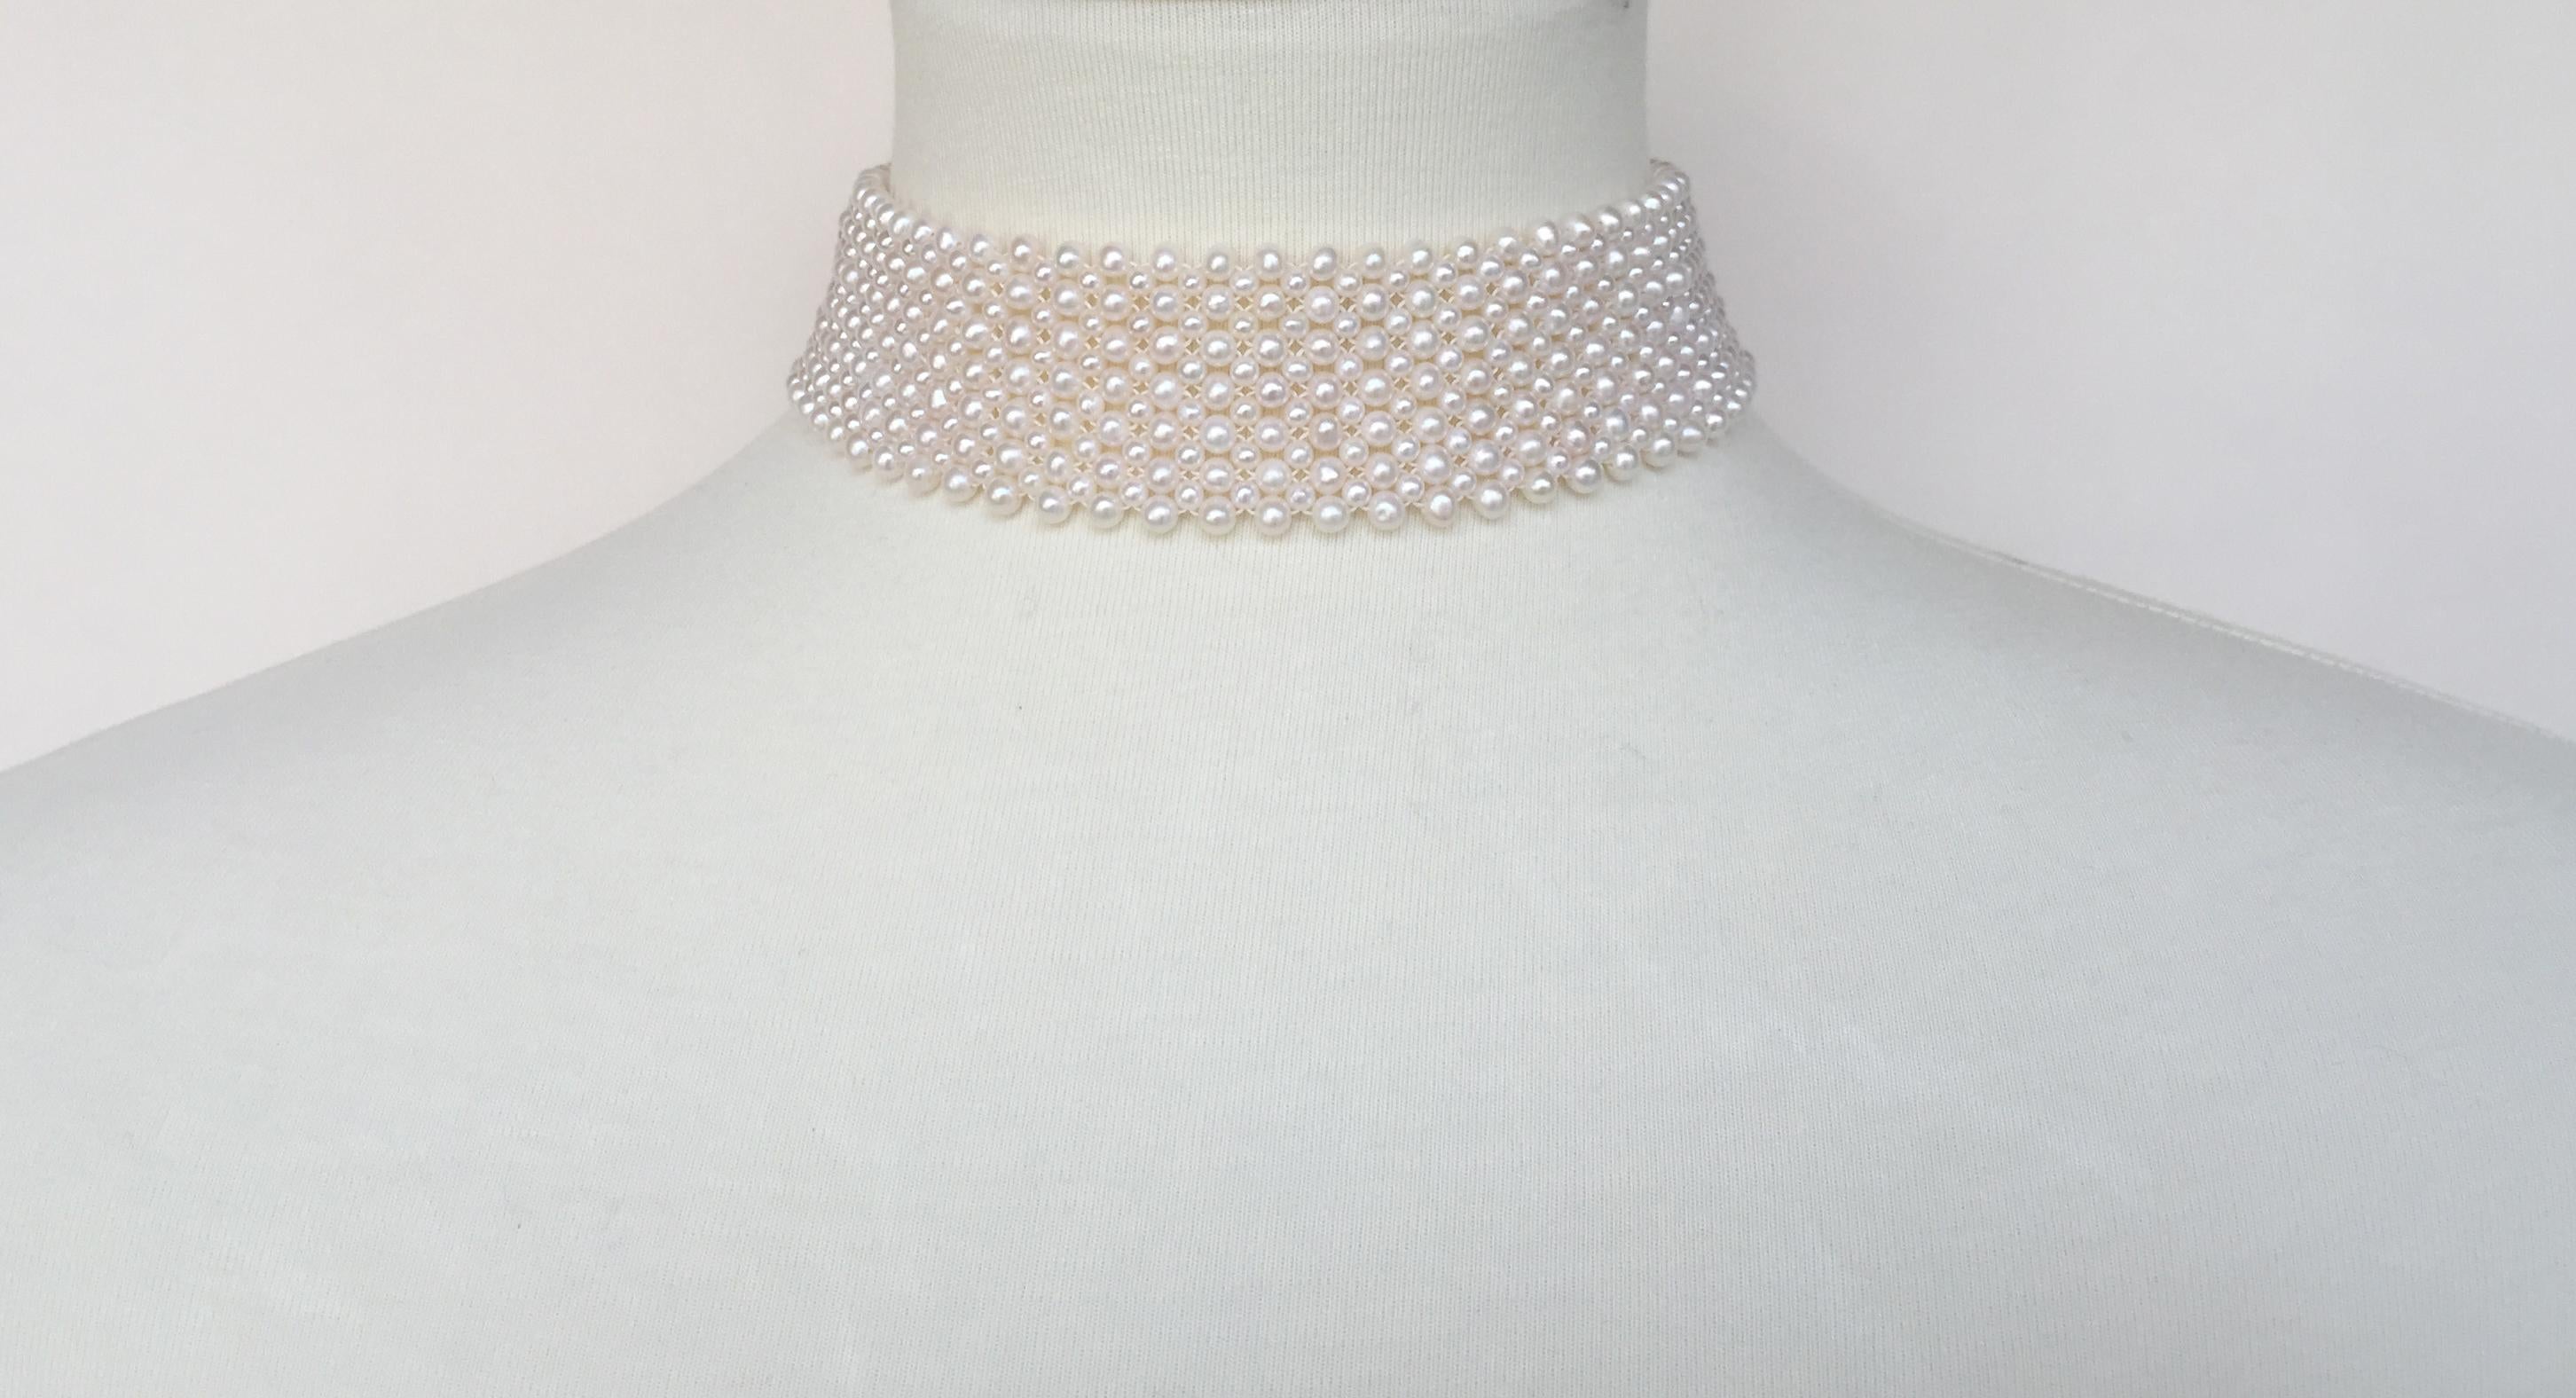 This woven round white pearl wide choker with sterling silver sliding clasp was hand crafted by Marina J.. Each glowing pearl was chosen specifically for its size and shape, creating an intricate design of small and slightly larger pearls. The